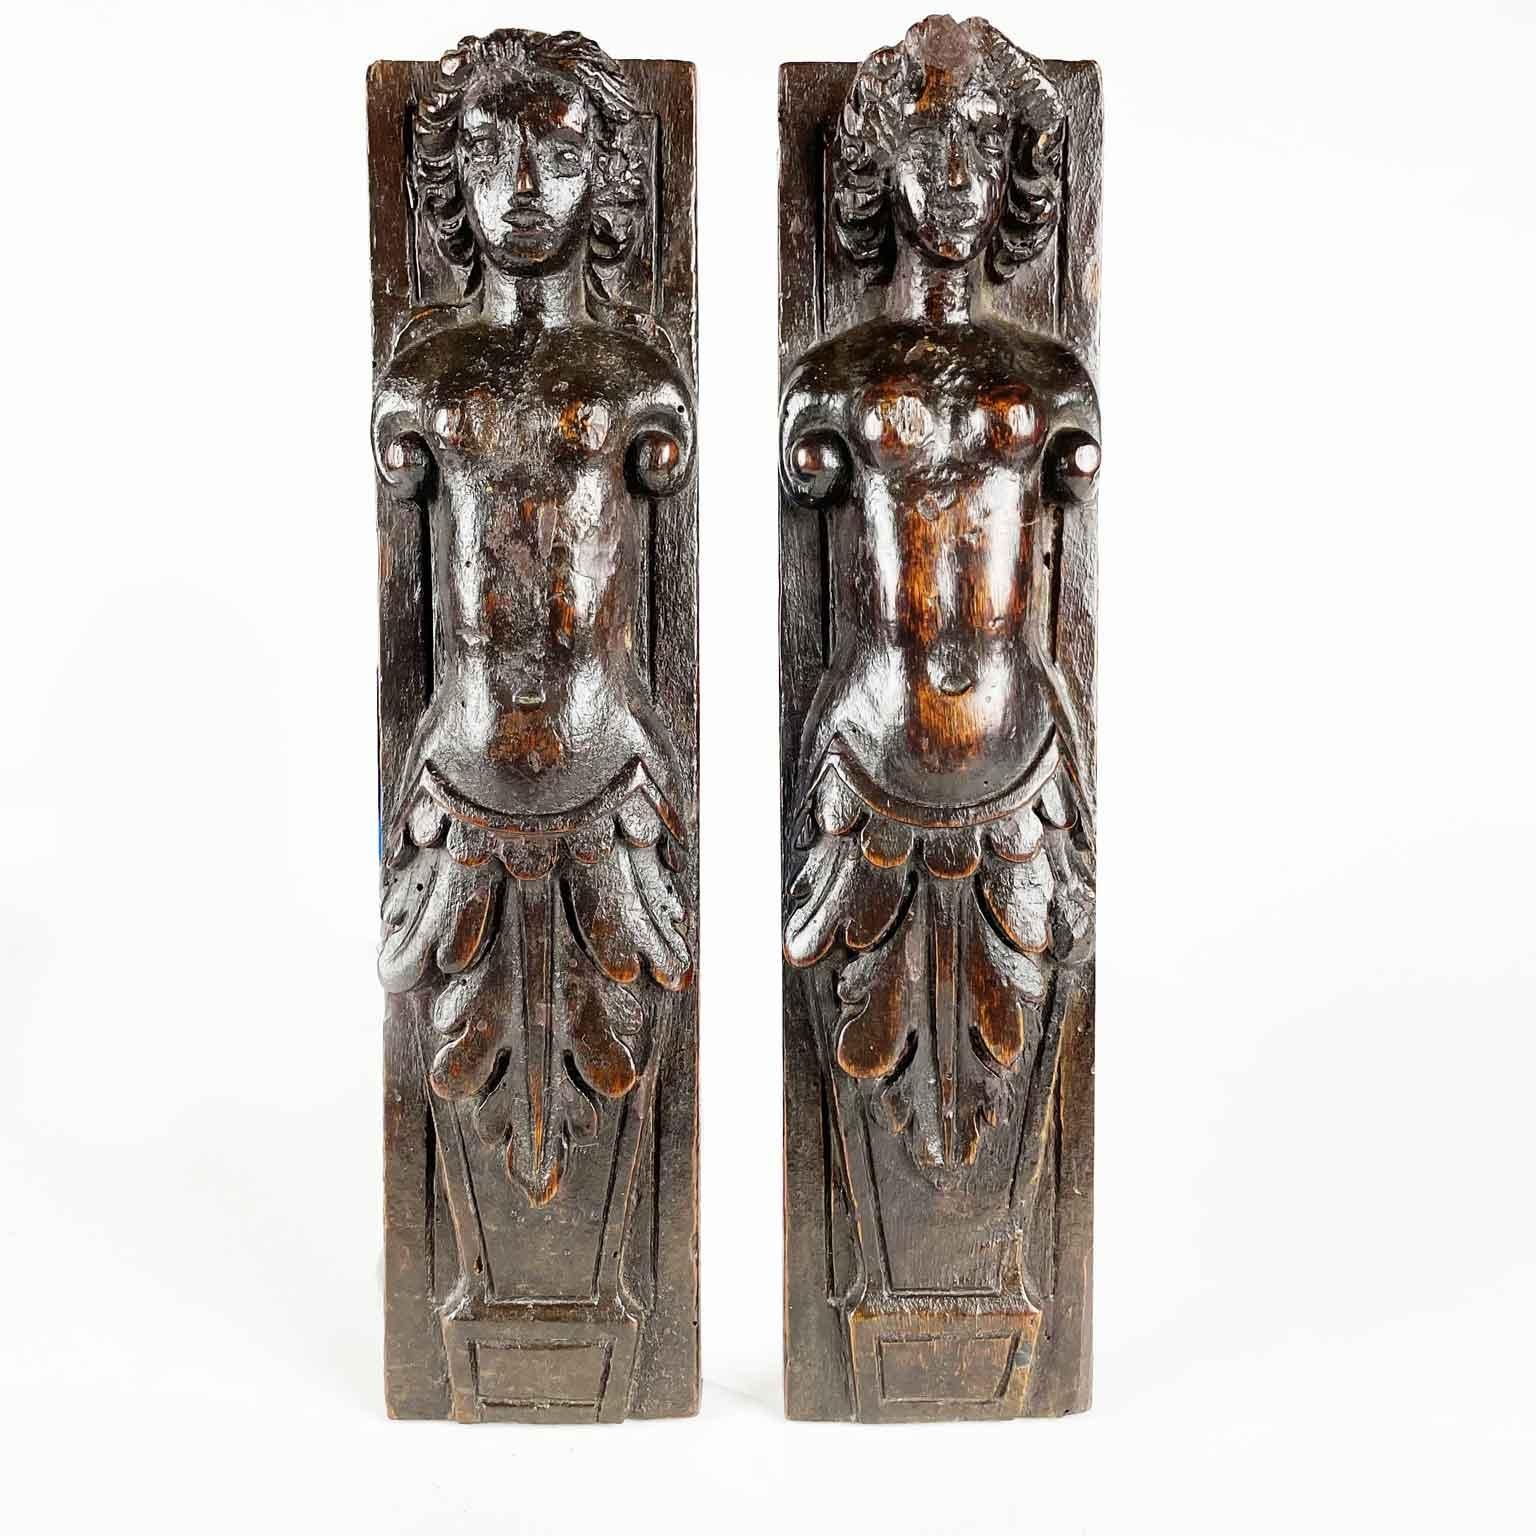 Pair of 17th century Italian walnut carved caryatids, an antique pair of Baroque hand-carved female figures with a beautiful dark patina. Good age related conditions, both carved panels show original iron hooks in the back, they were probably part